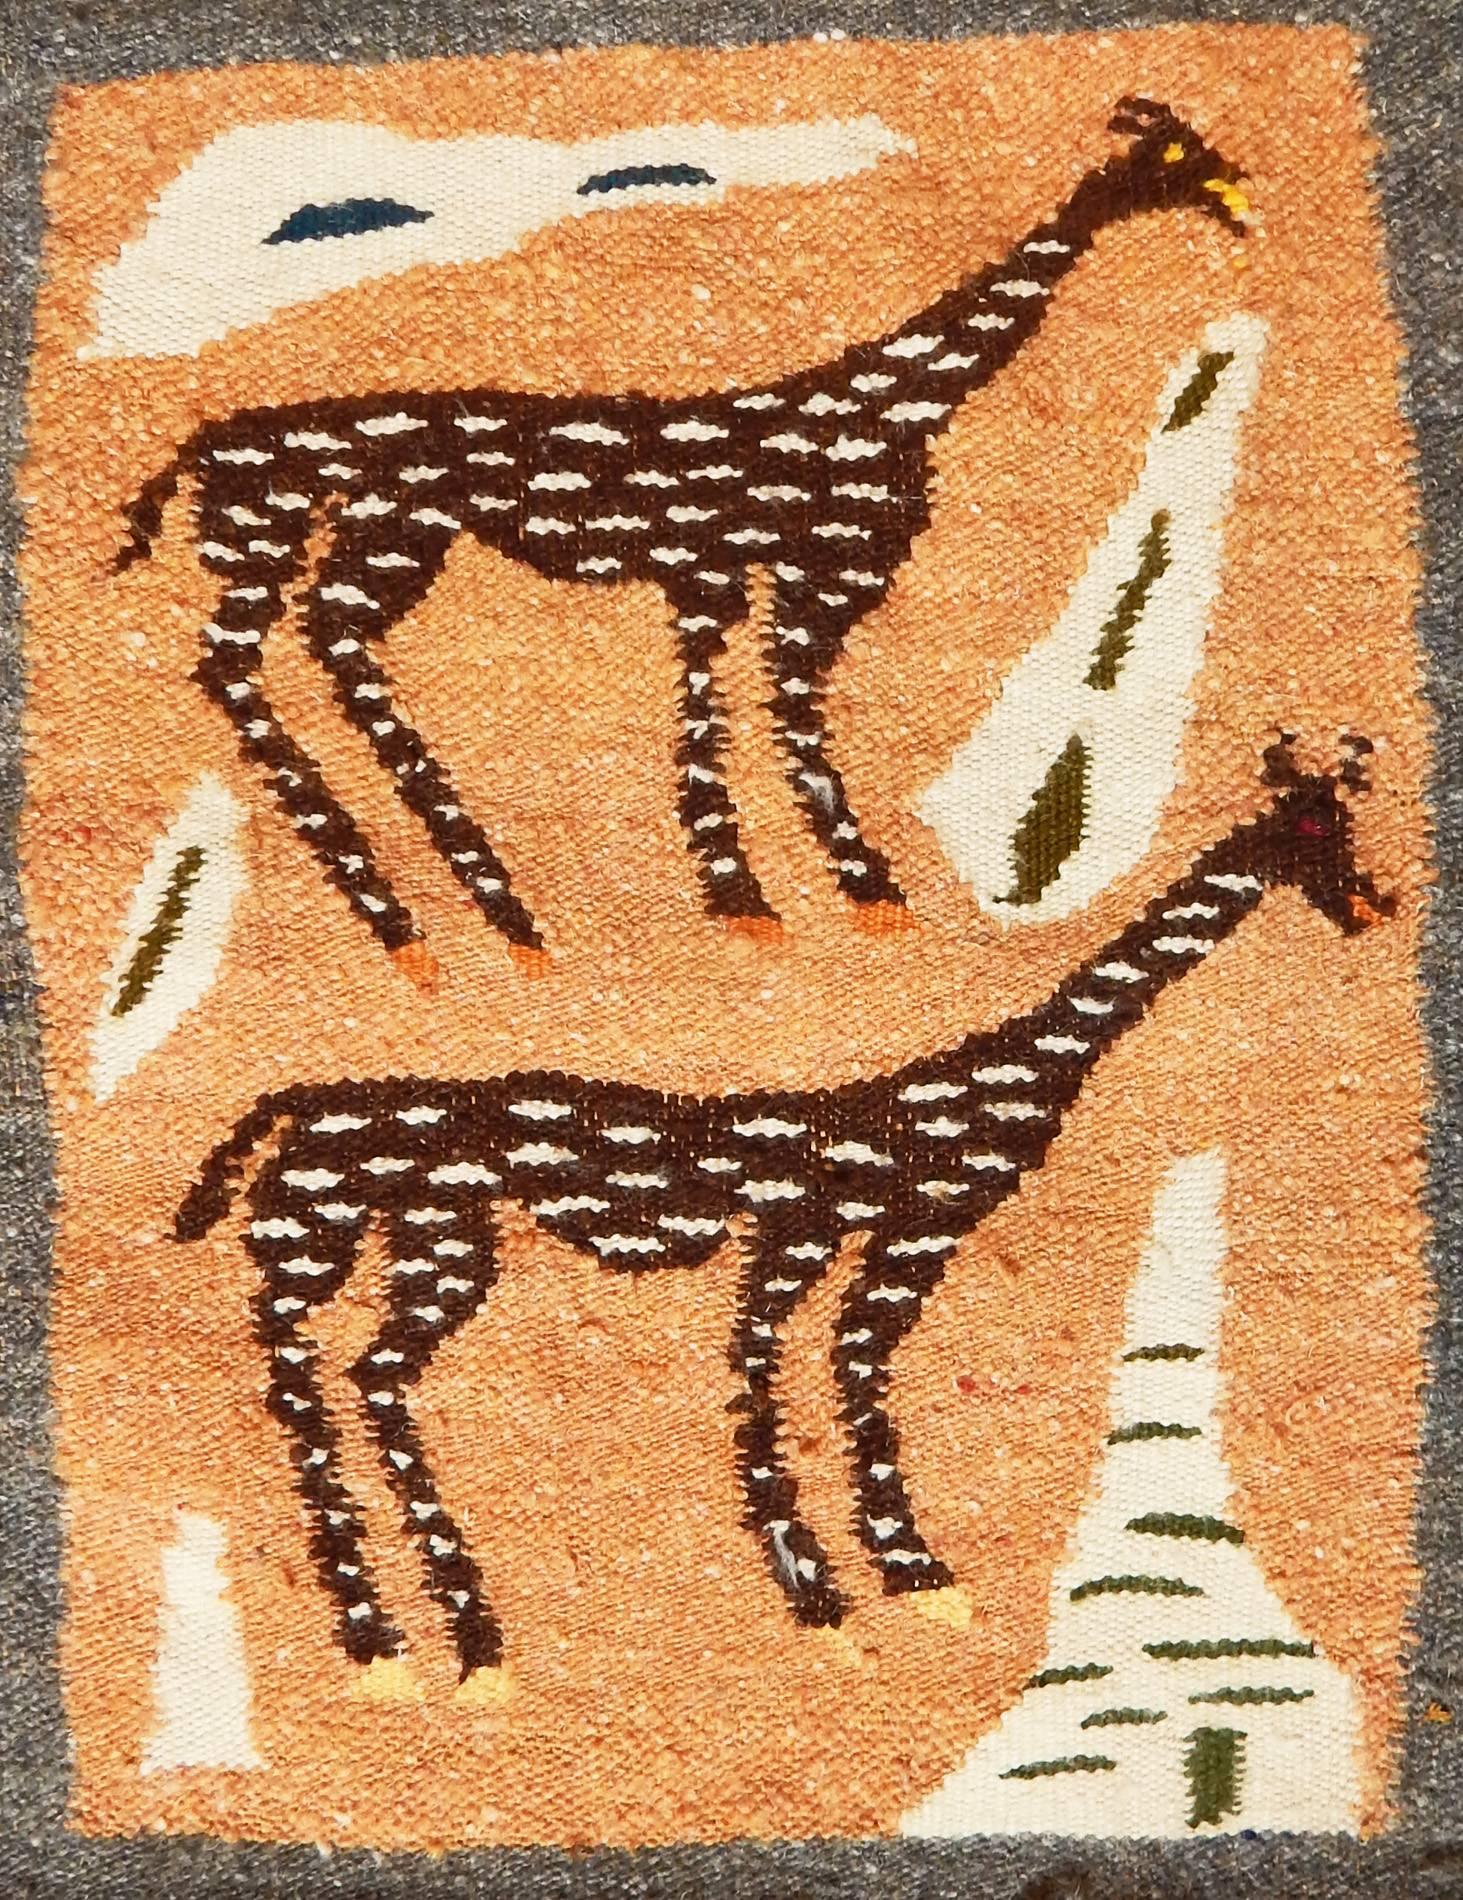 Perhaps inspired by the renewal of ancient weaving traditions undertaken by the Ramses Wissa Wassef workshop in Egypt, among others in North Africa, this marvelous Mid-Century tapestry in nubby wool depicts a variety of flora and fauna from the